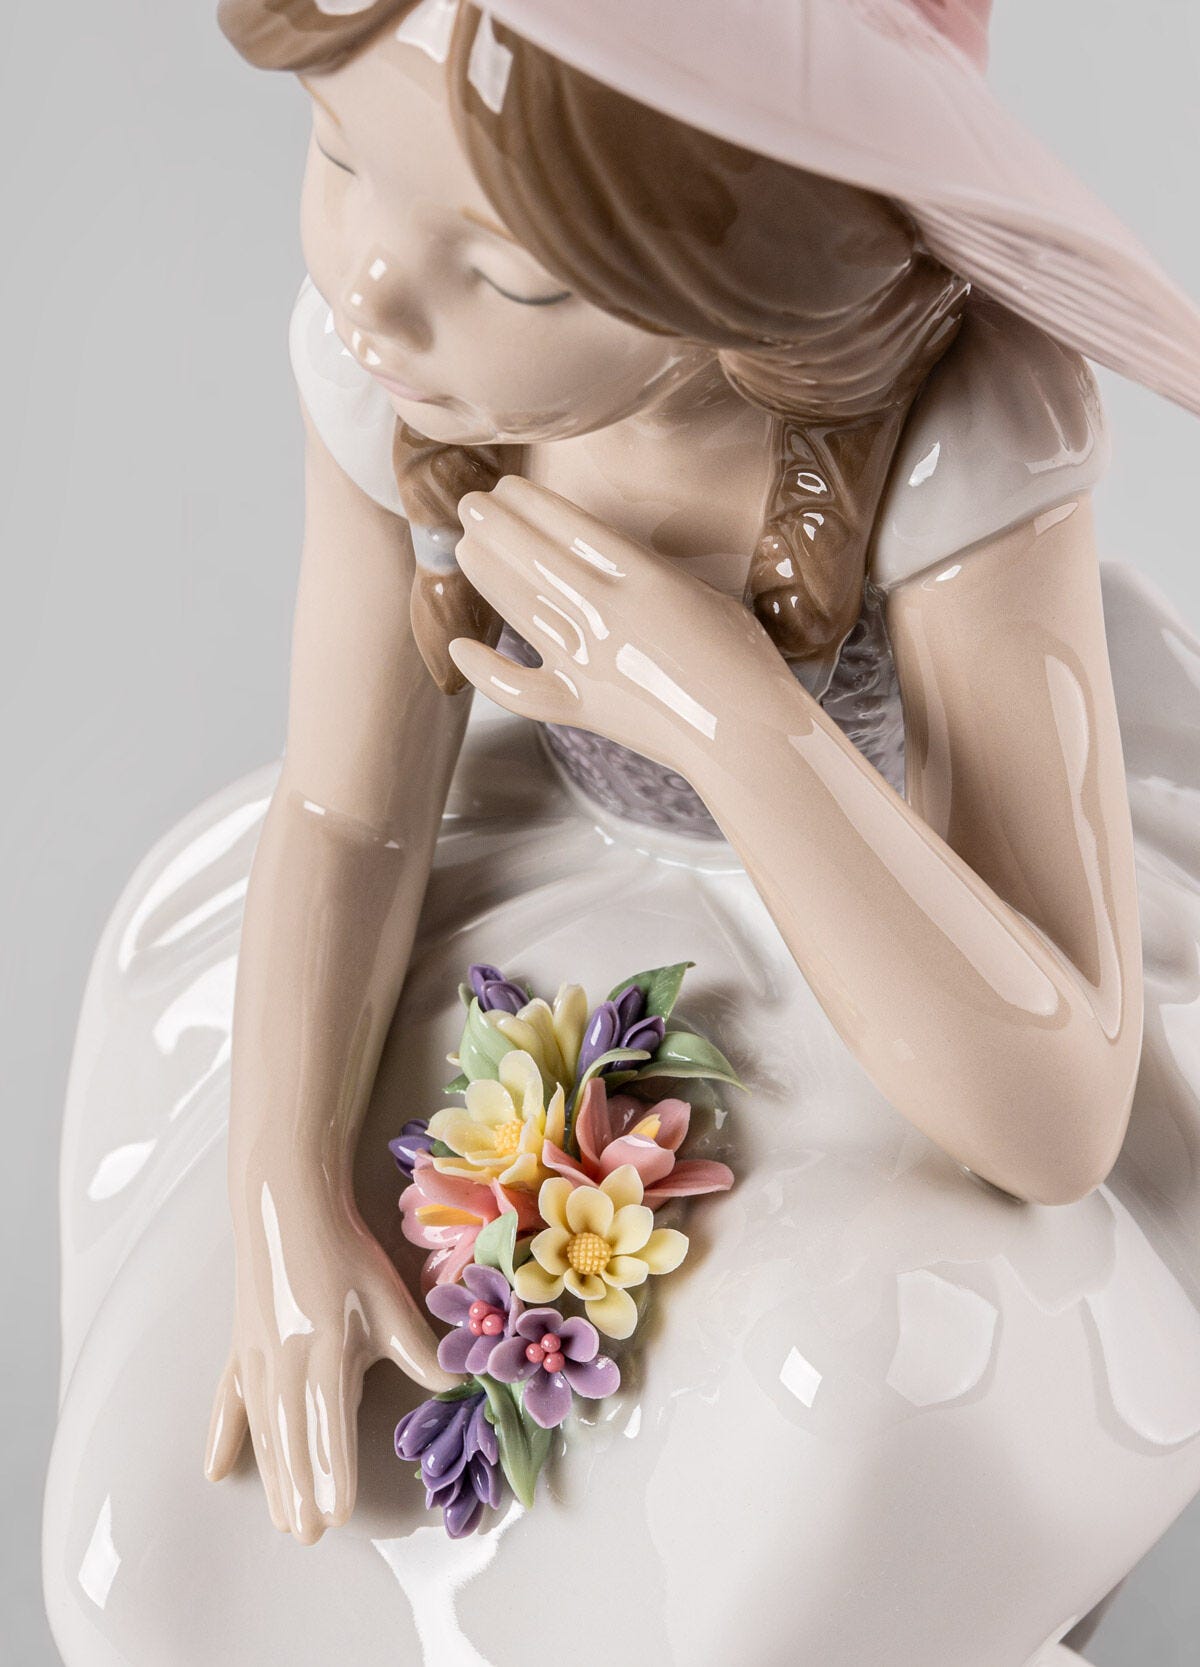 Spring Has Come Girl Figurine